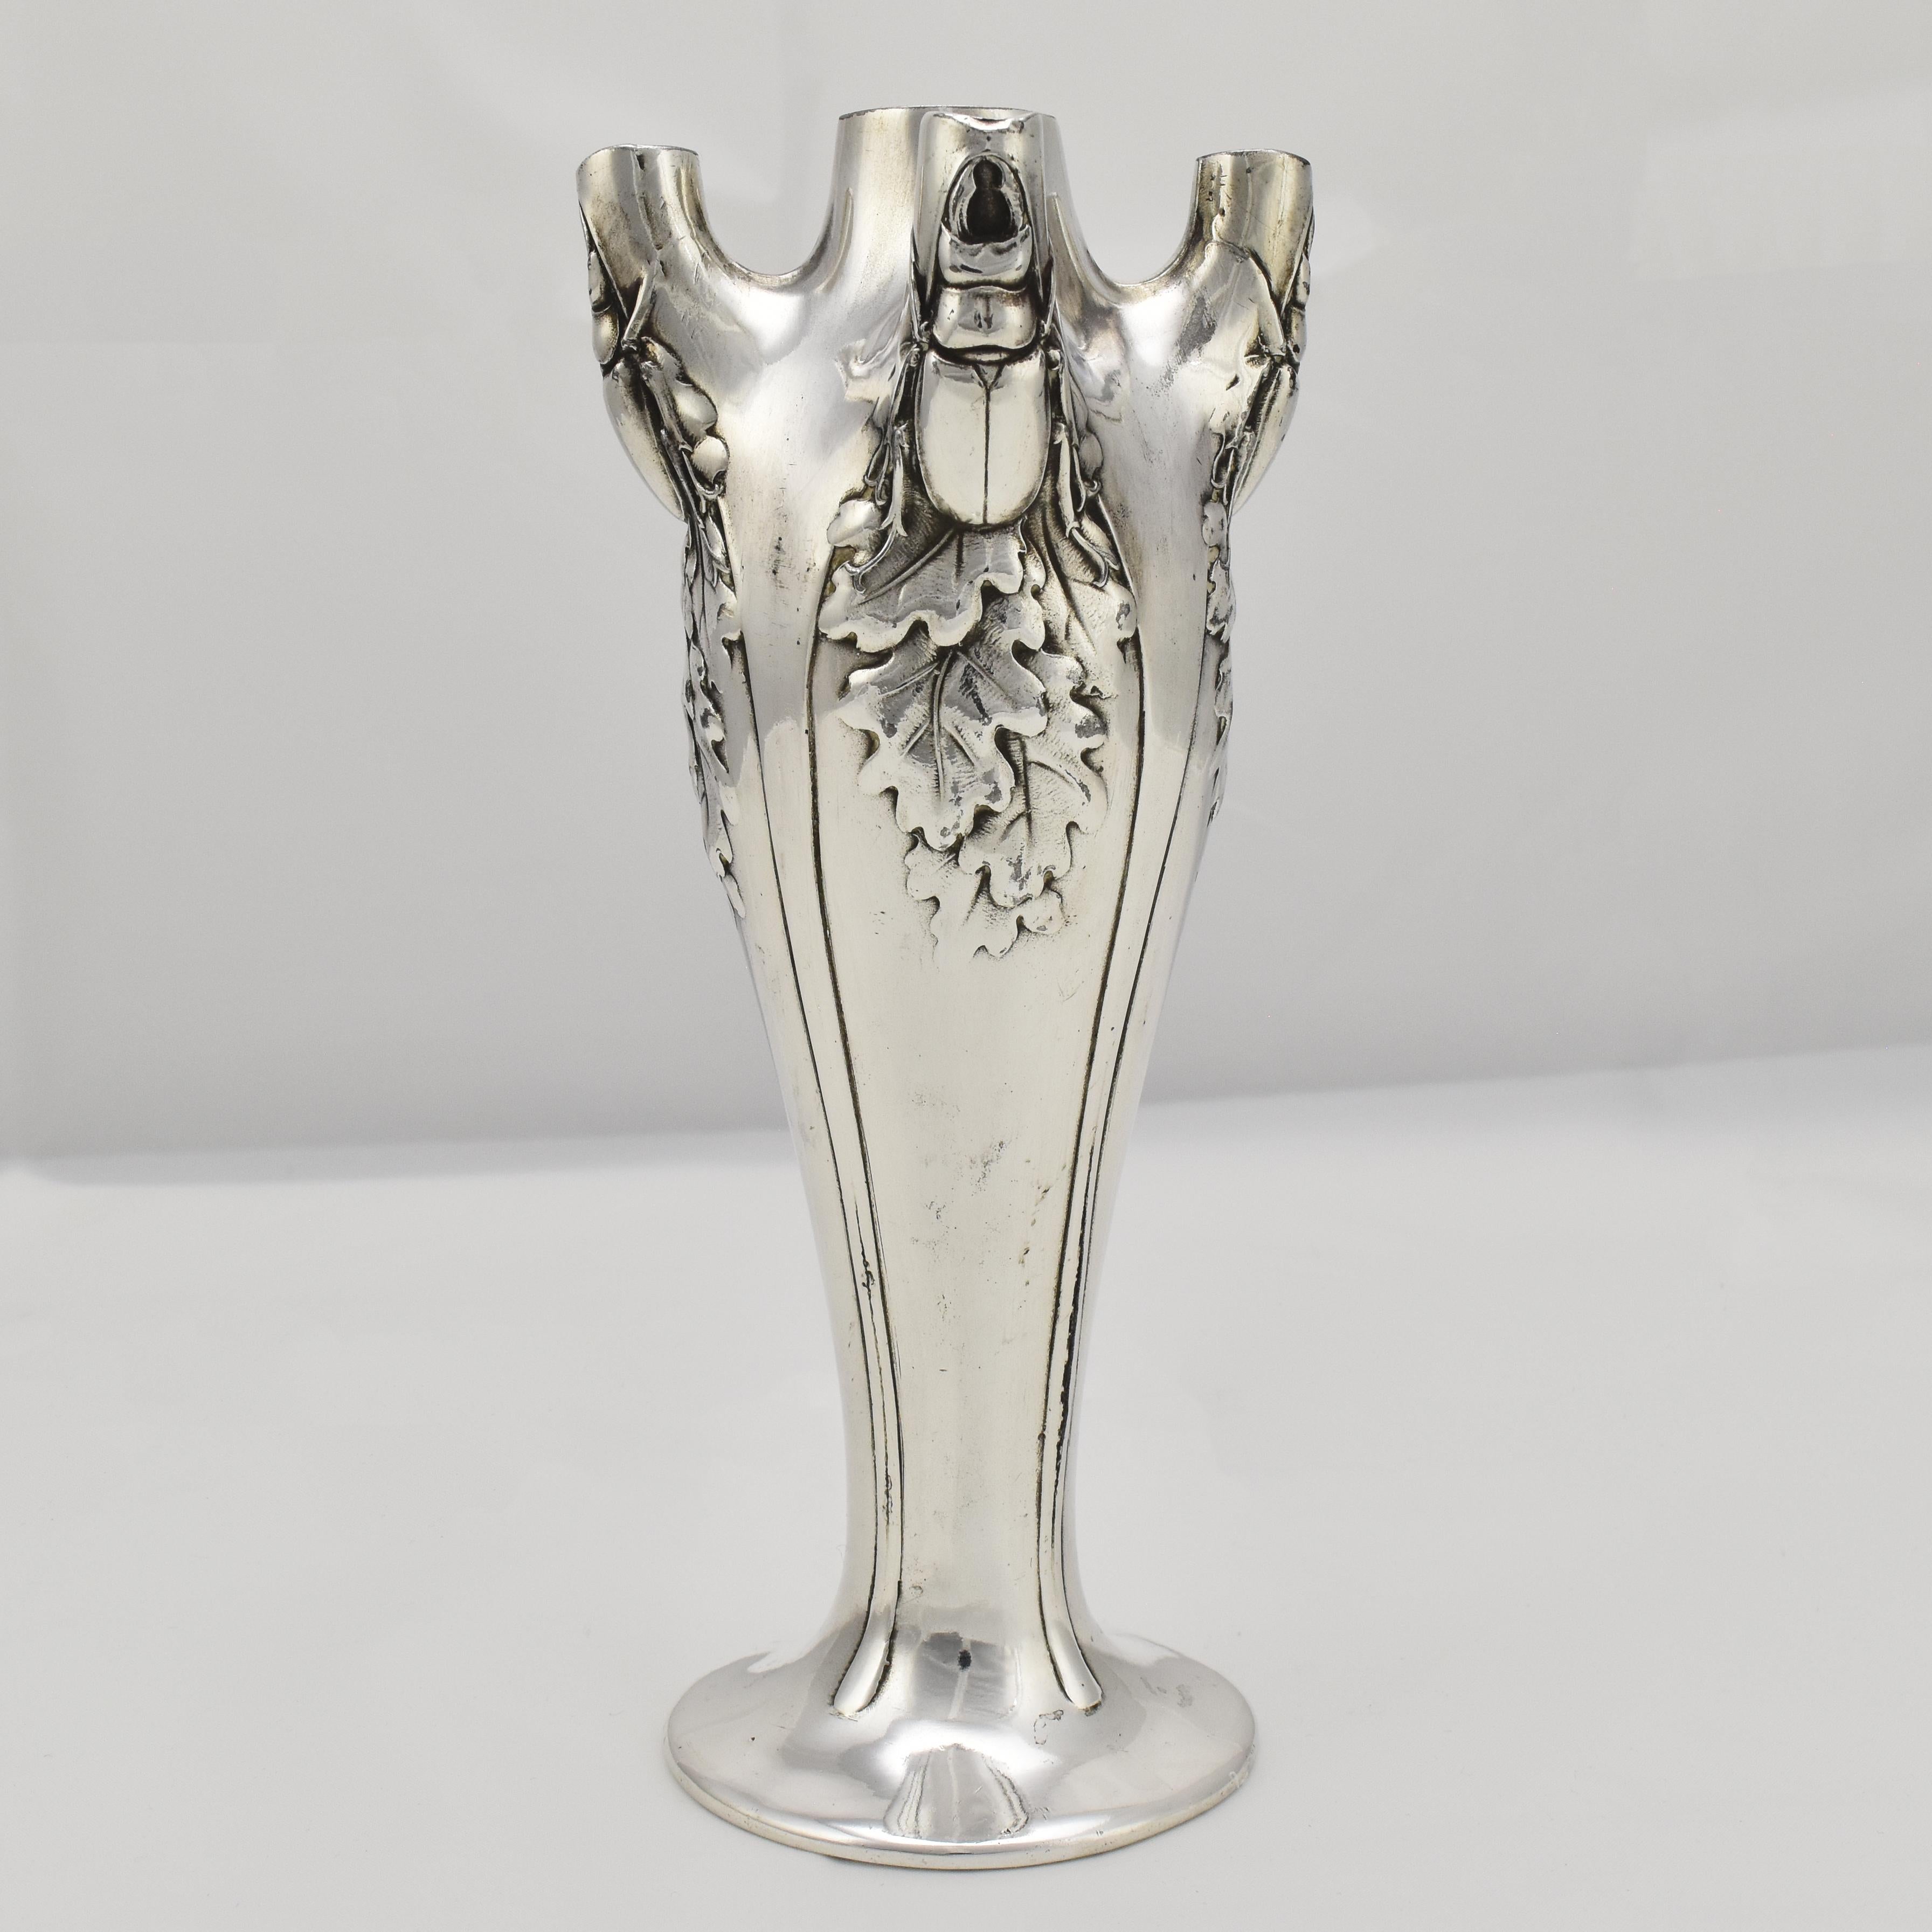 Antique decorative Christofle Gallia Art Nouveau vase with five stems decorated with stag beetles and oak leaves made from silverplated pewter. Marked on the bottom with the manufacturers mark and numbered 4842. 